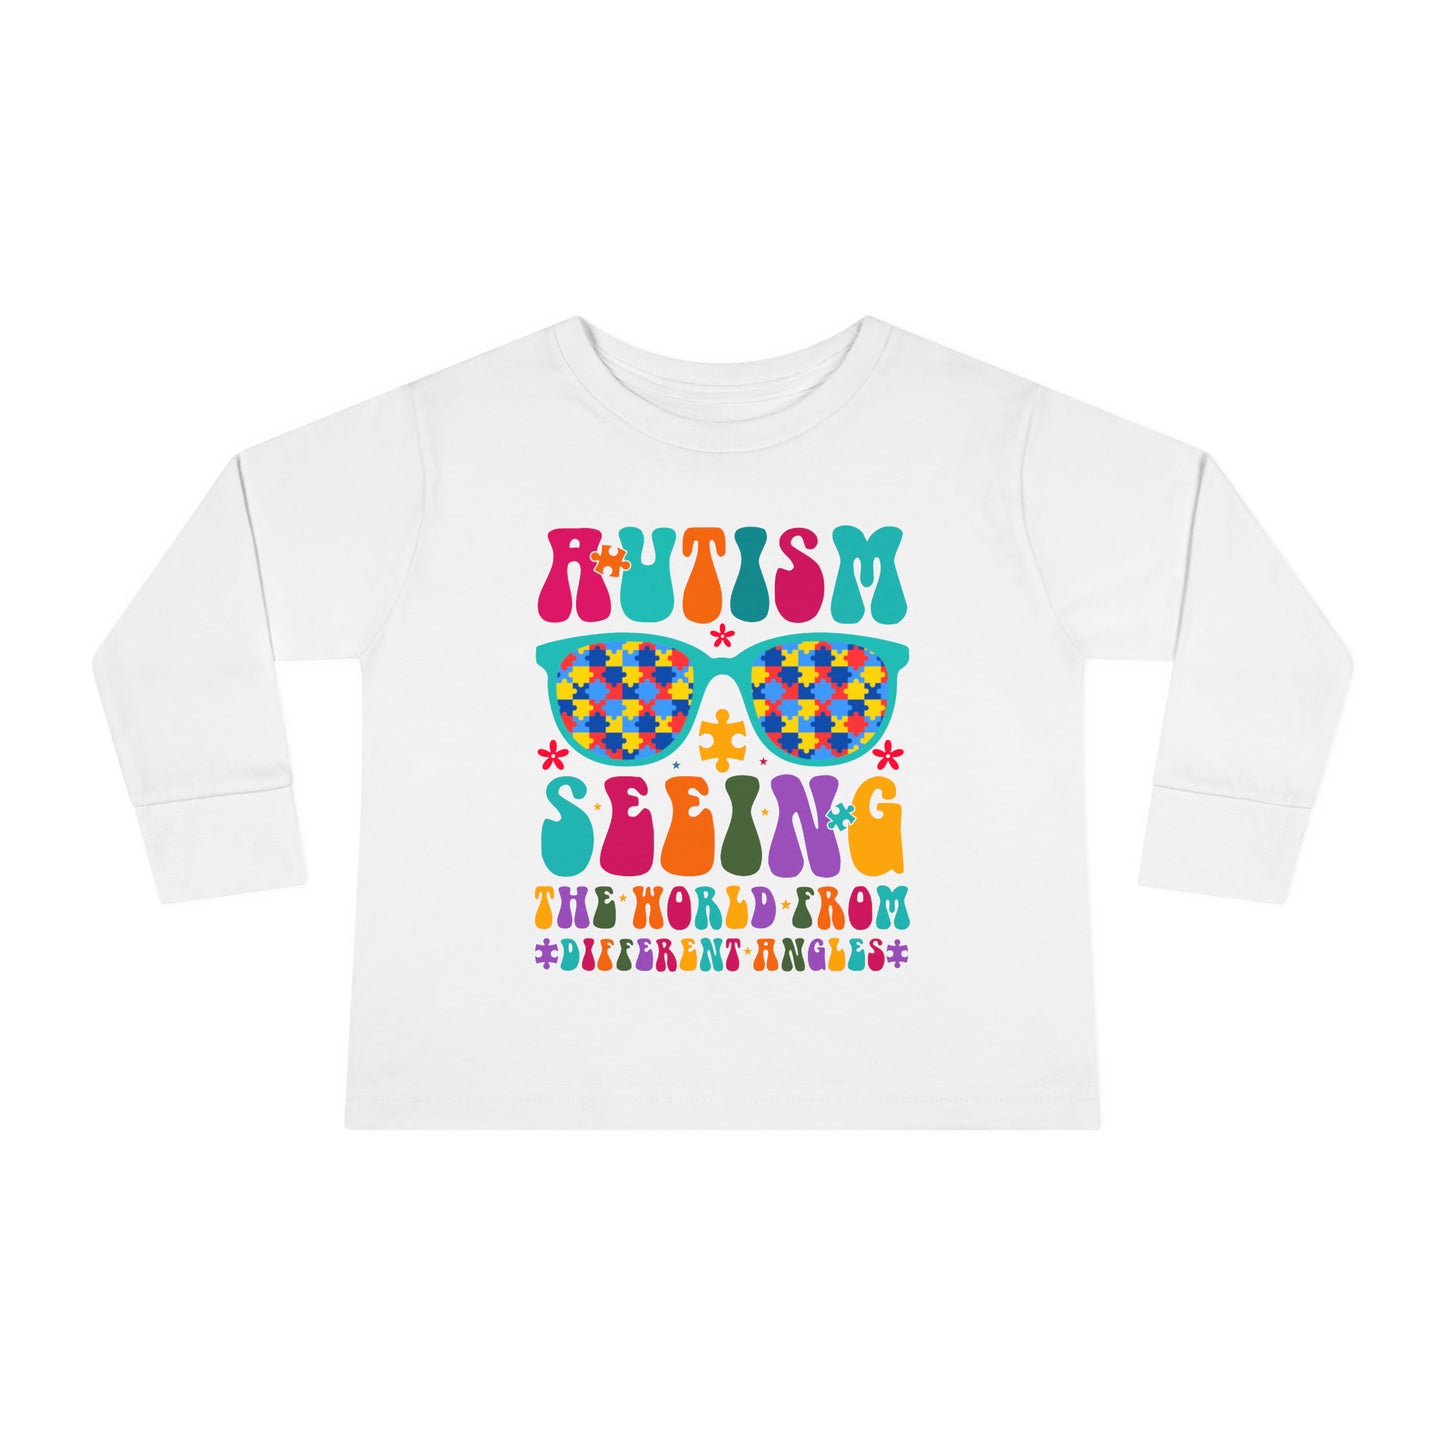 Autism Seeing The World Differently Toddler Long Sleeve Tee